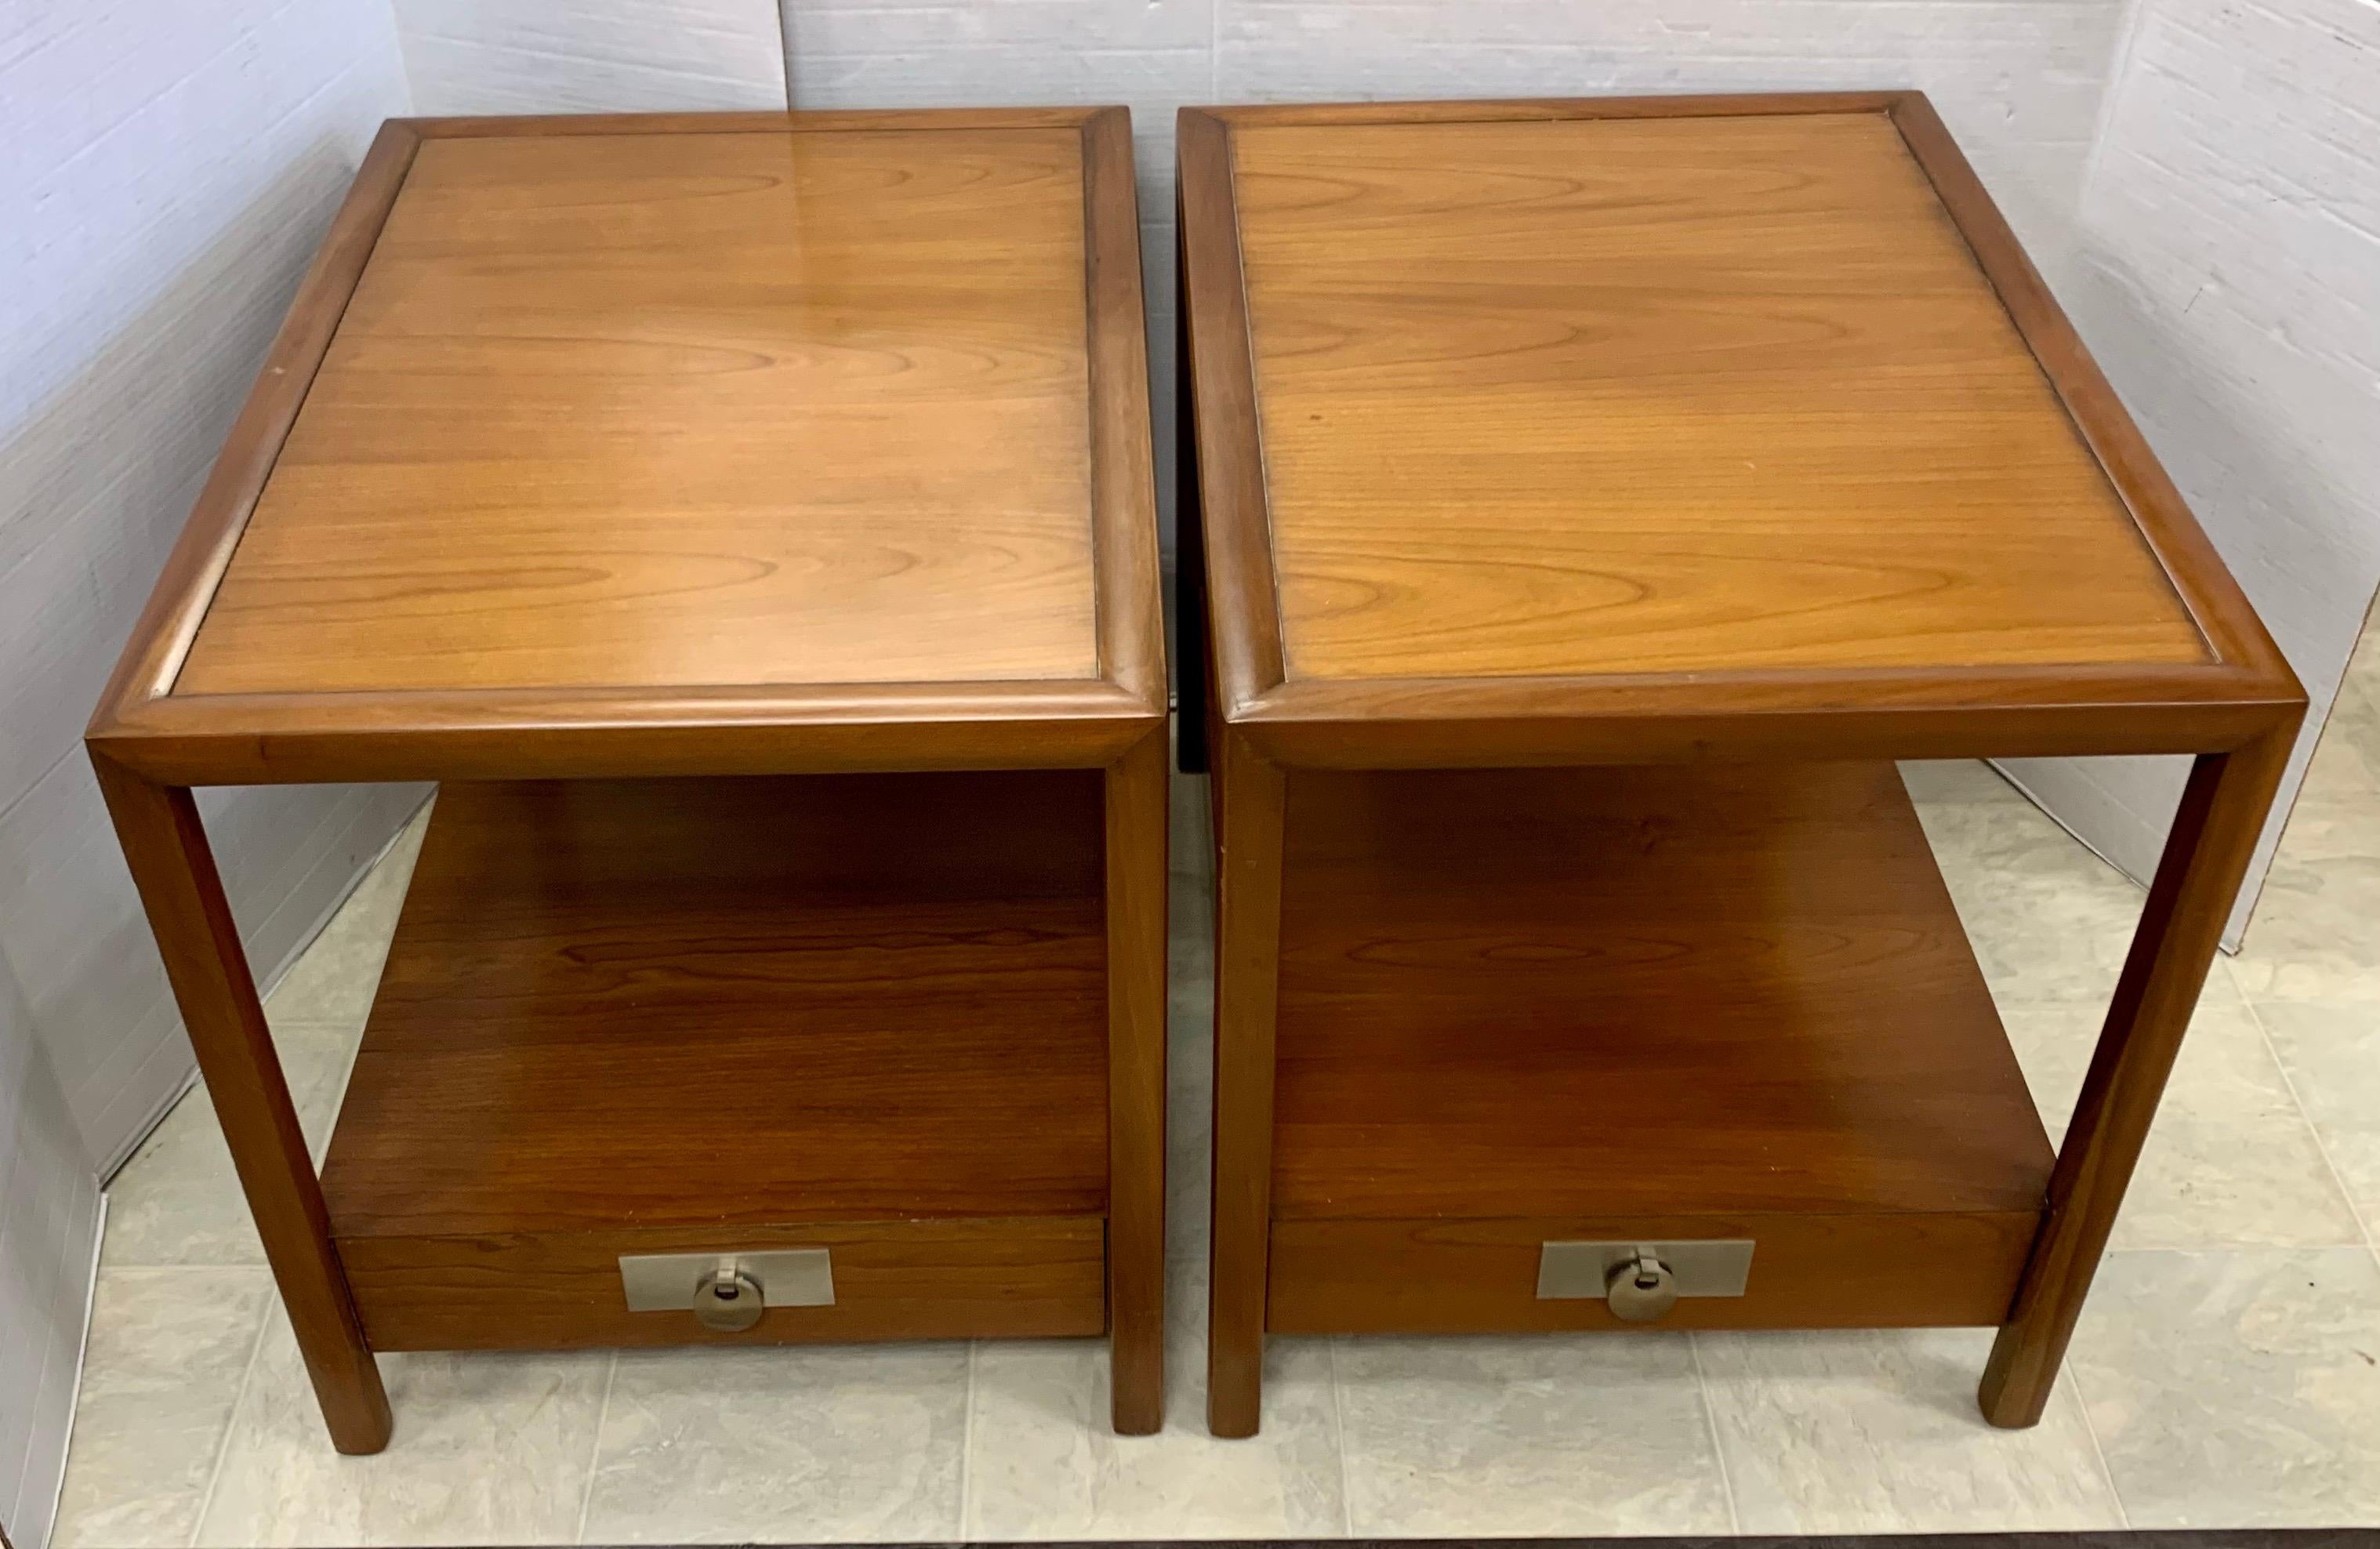 Pair of Rectangular Lamp Tables by Michael Taylor for Baker Furniture New World 1